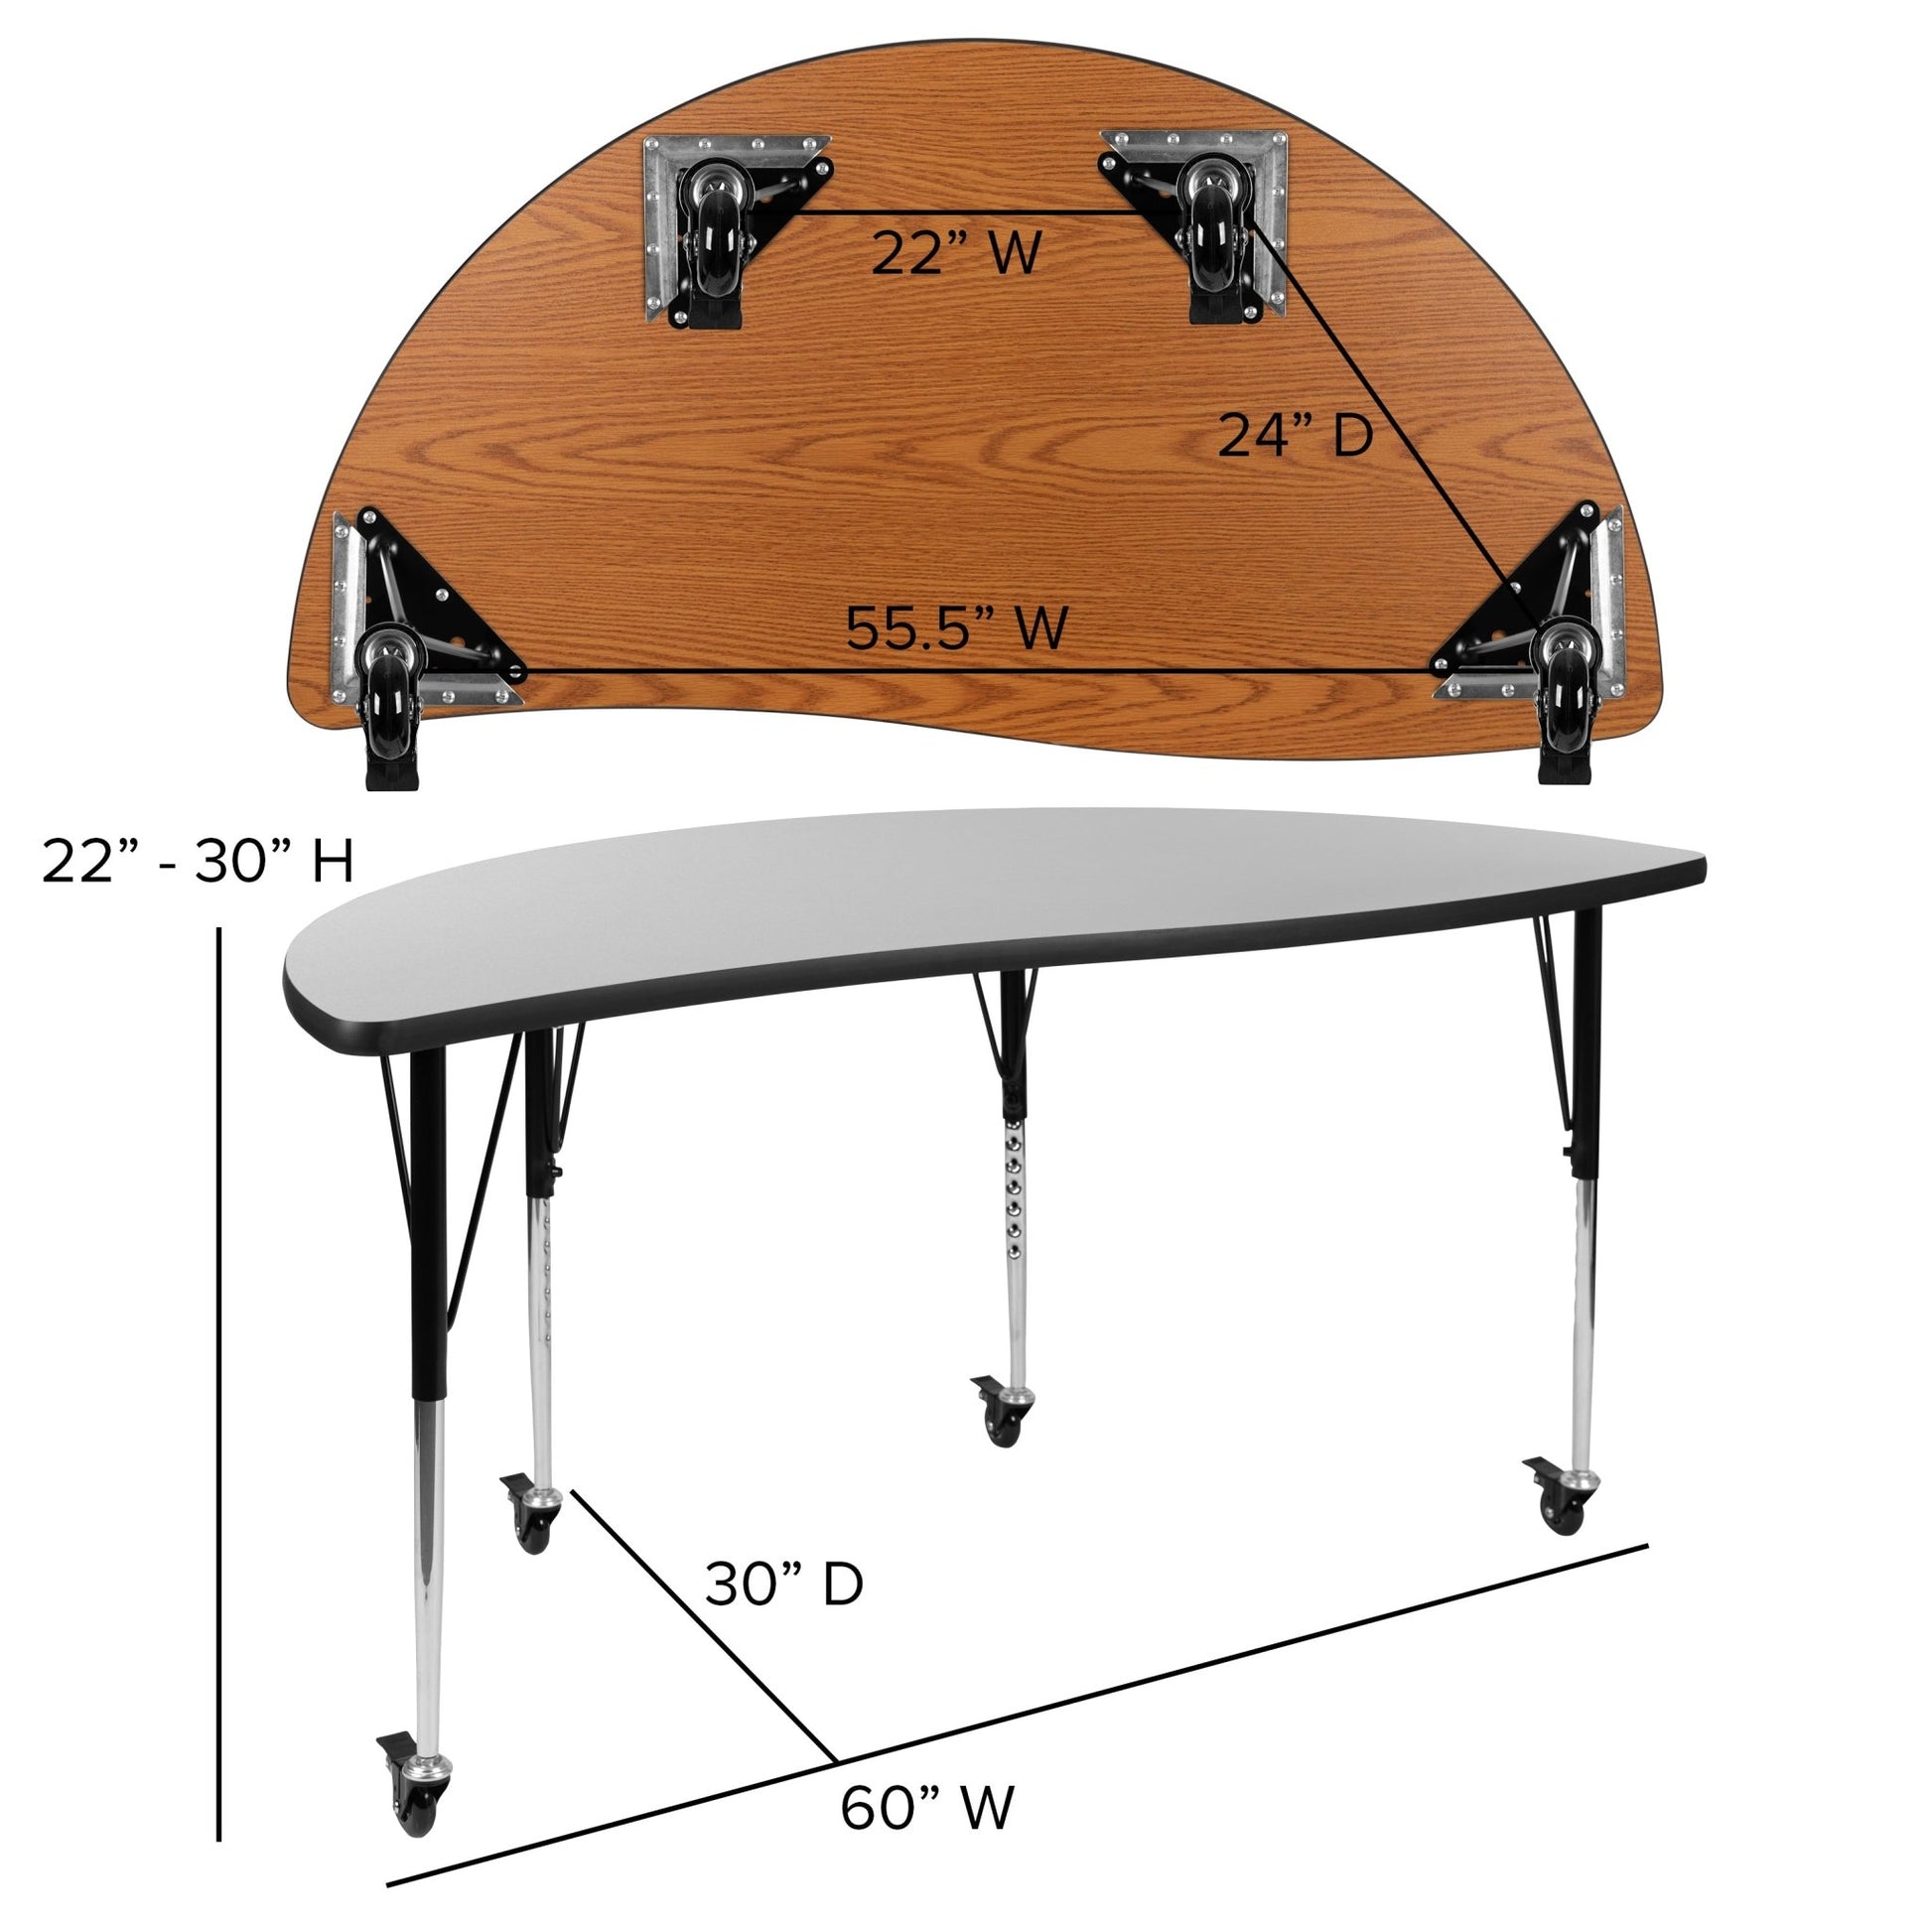 Wren Mobile 60" Half Circle Wave Flexible Collaborative Thermal Laminate Activity Table-Standard Height Adjust Legs - SchoolOutlet